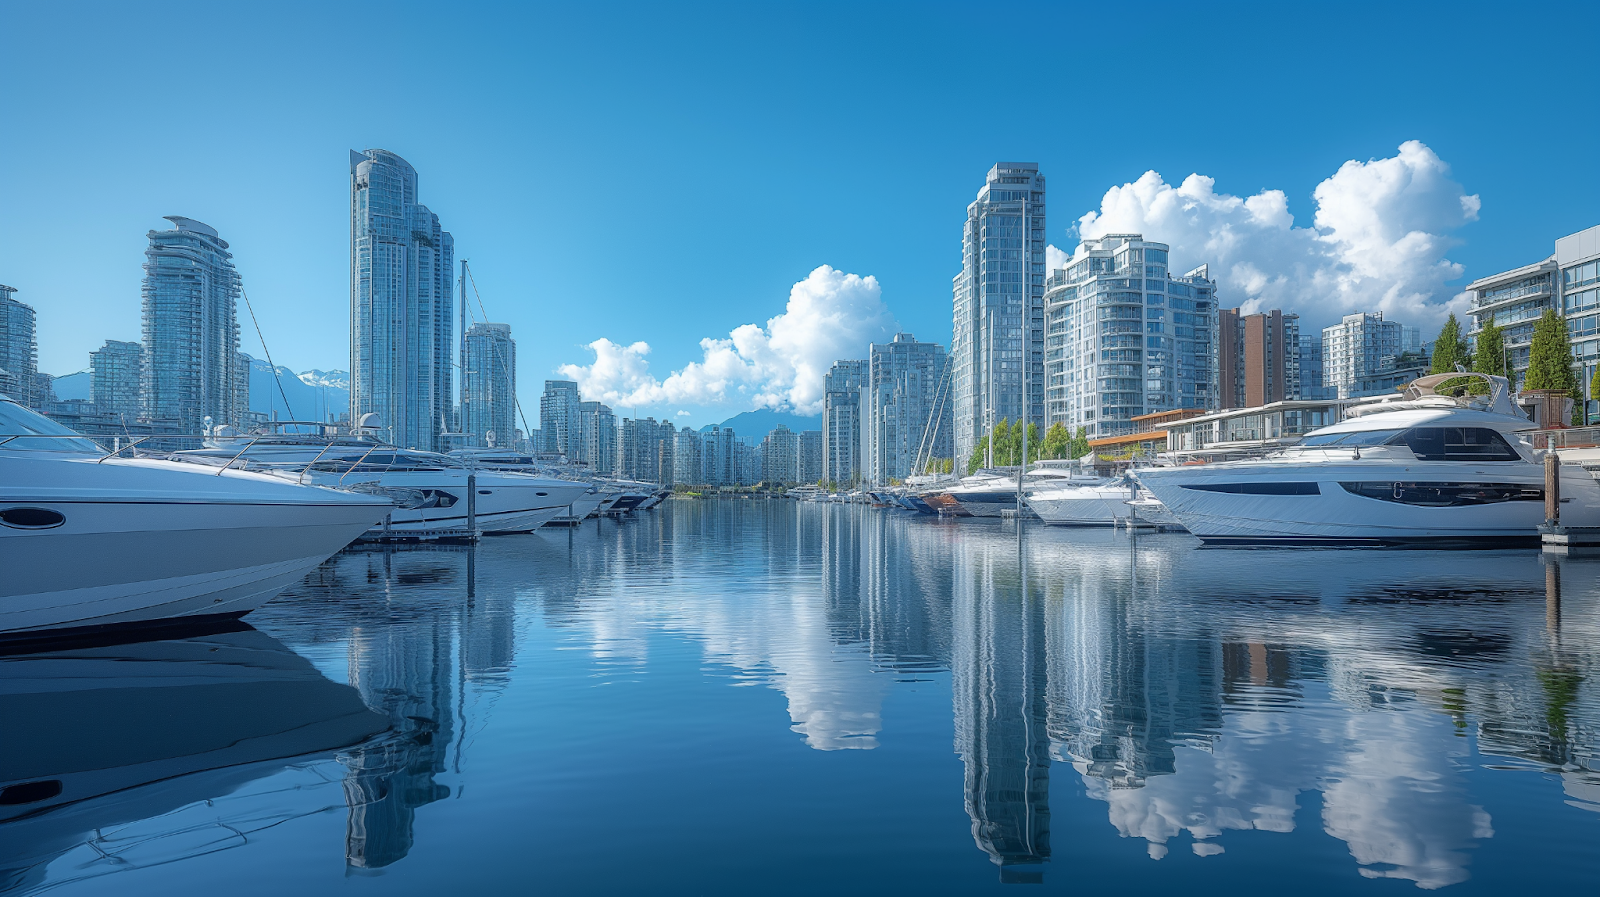 Sailboats moored in a marina, with Vancouver's sleek modern skyline rising in the background.